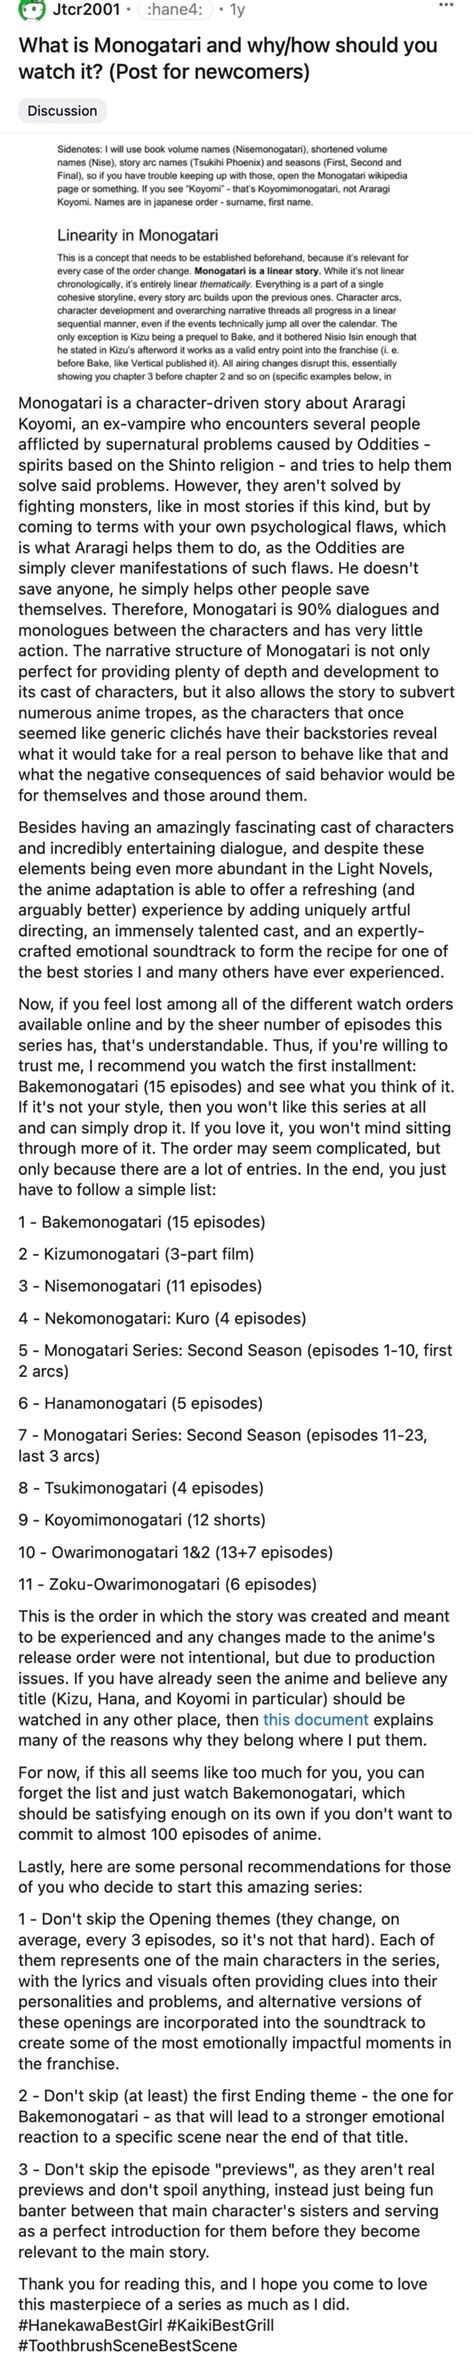 What Is Monogatari And Should You Watch It Post For Newcomers Discussion Sidenotes I Will